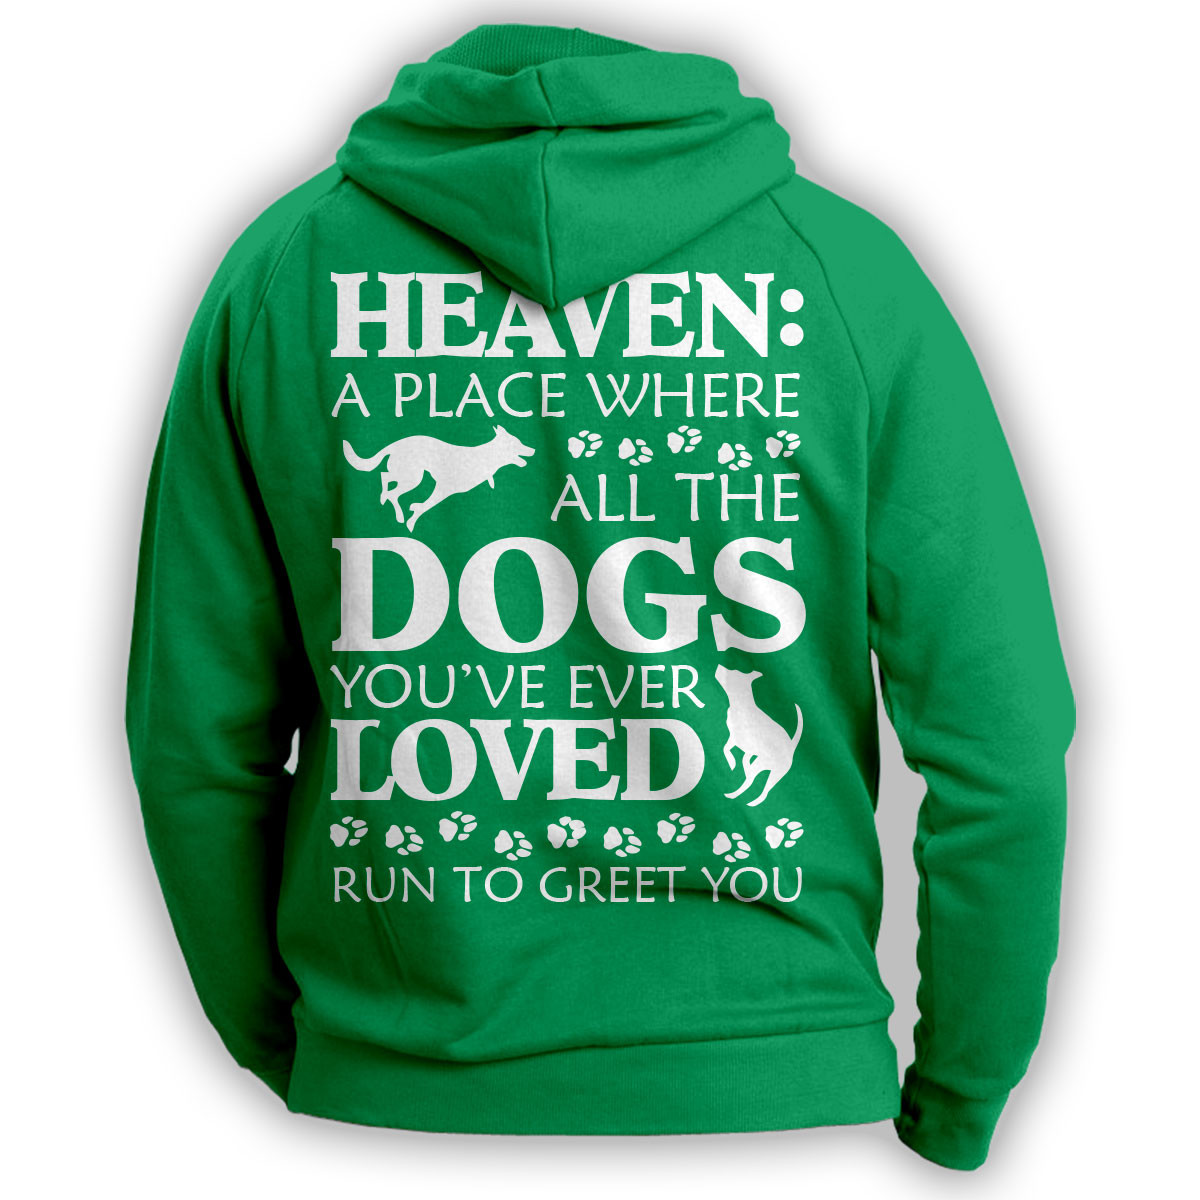 "Heaven: A Place Where Dogs Run To Greet You" Hoodie